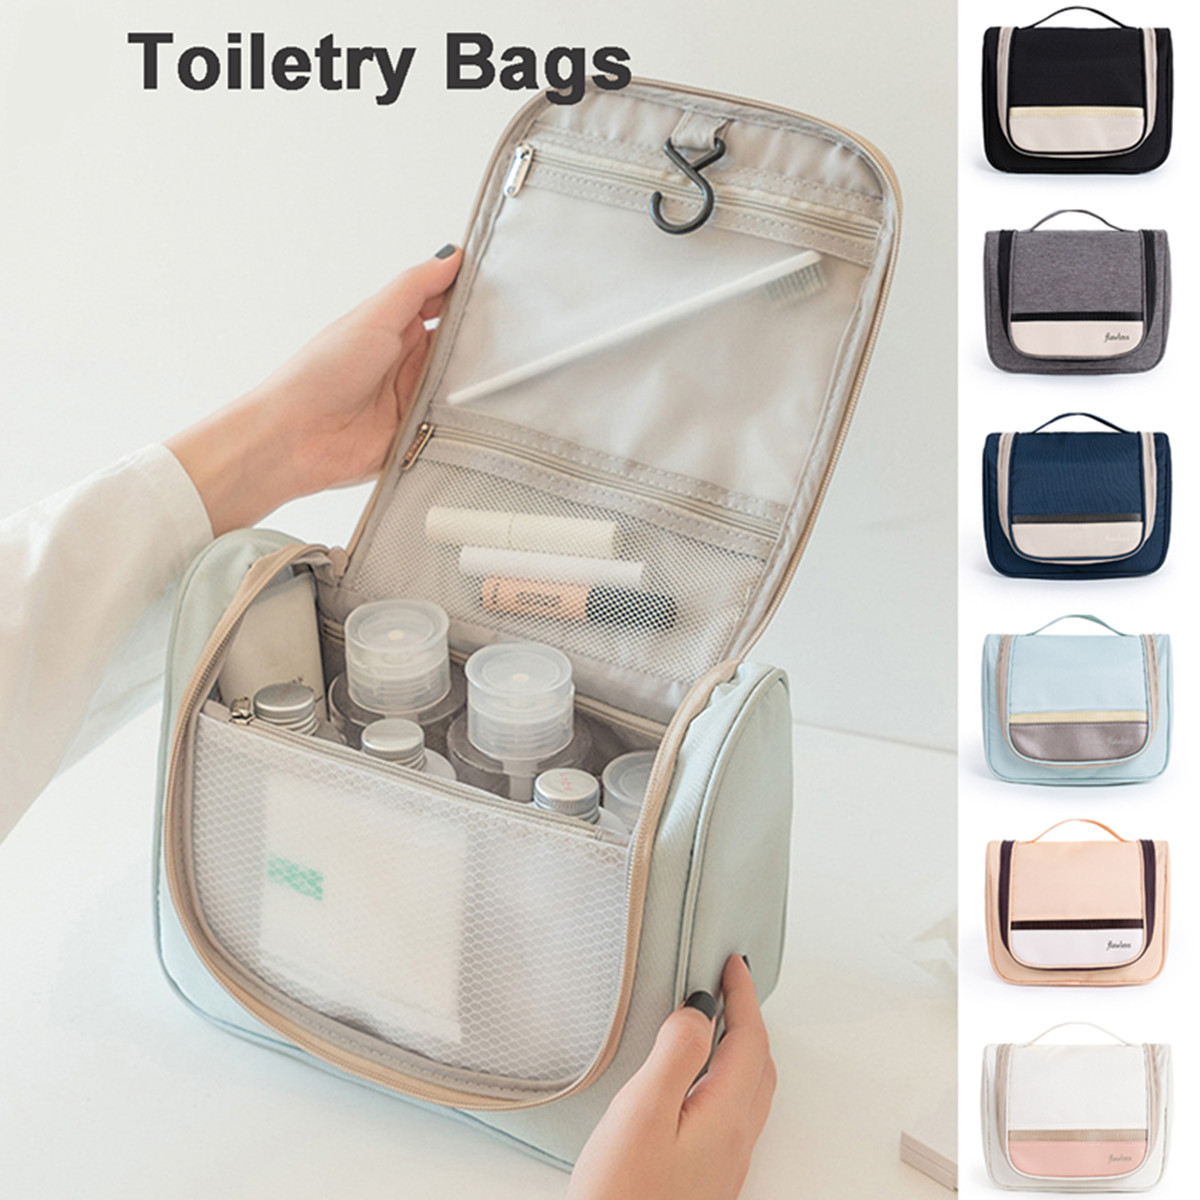 Polyester-Toiletry-Bag-Multicolor-Professional-Travel-Wash-Bag-Multifunctional-Cosmetics-Daily-Neces-1787672-1